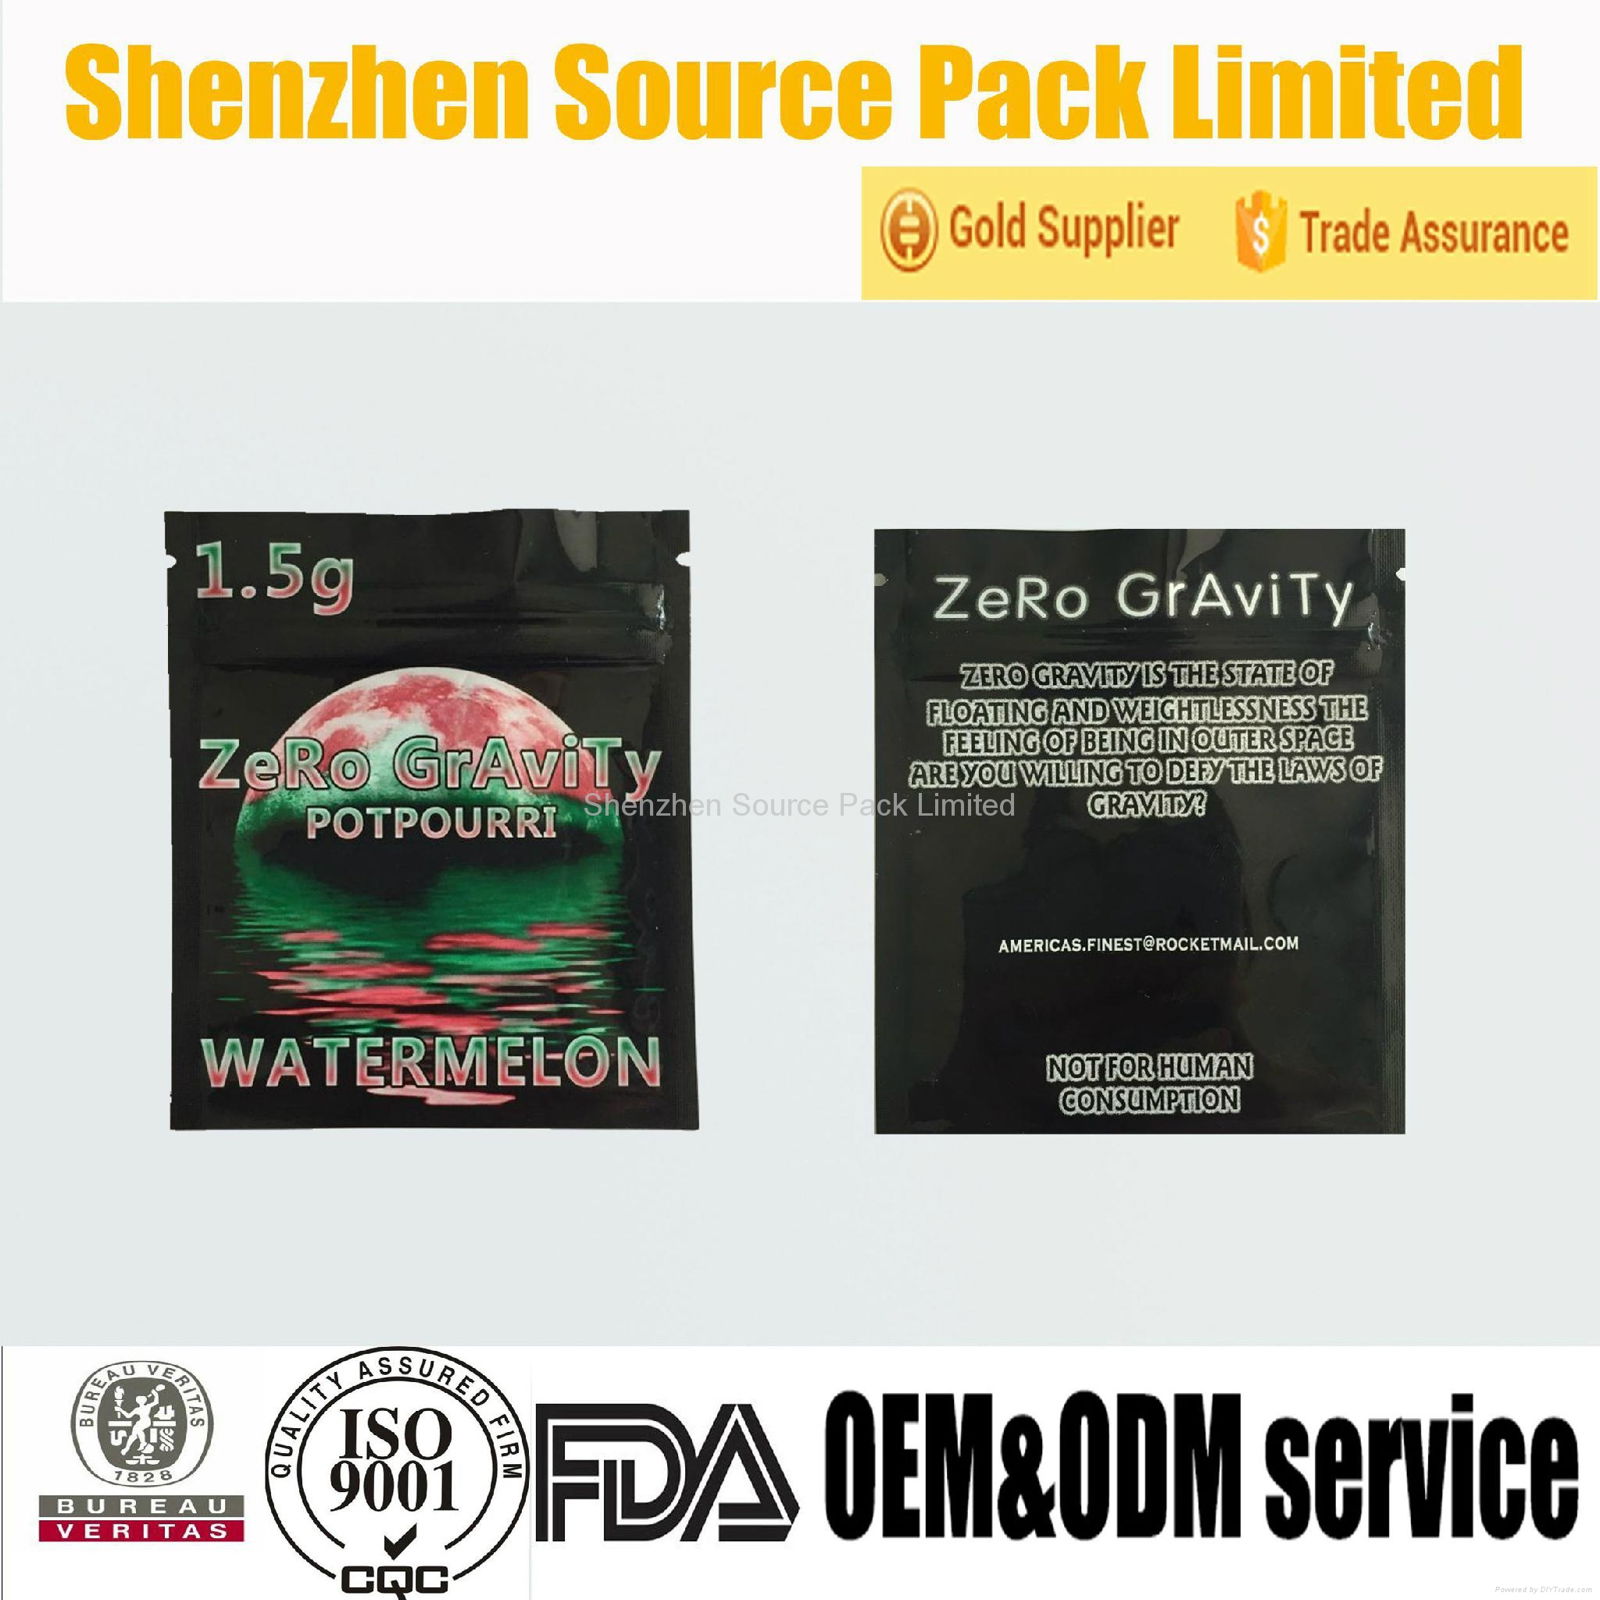 1.5g Food Grade Three Heat Sealed Zipper Bags with Tear Notch for Spice Potpourr 5